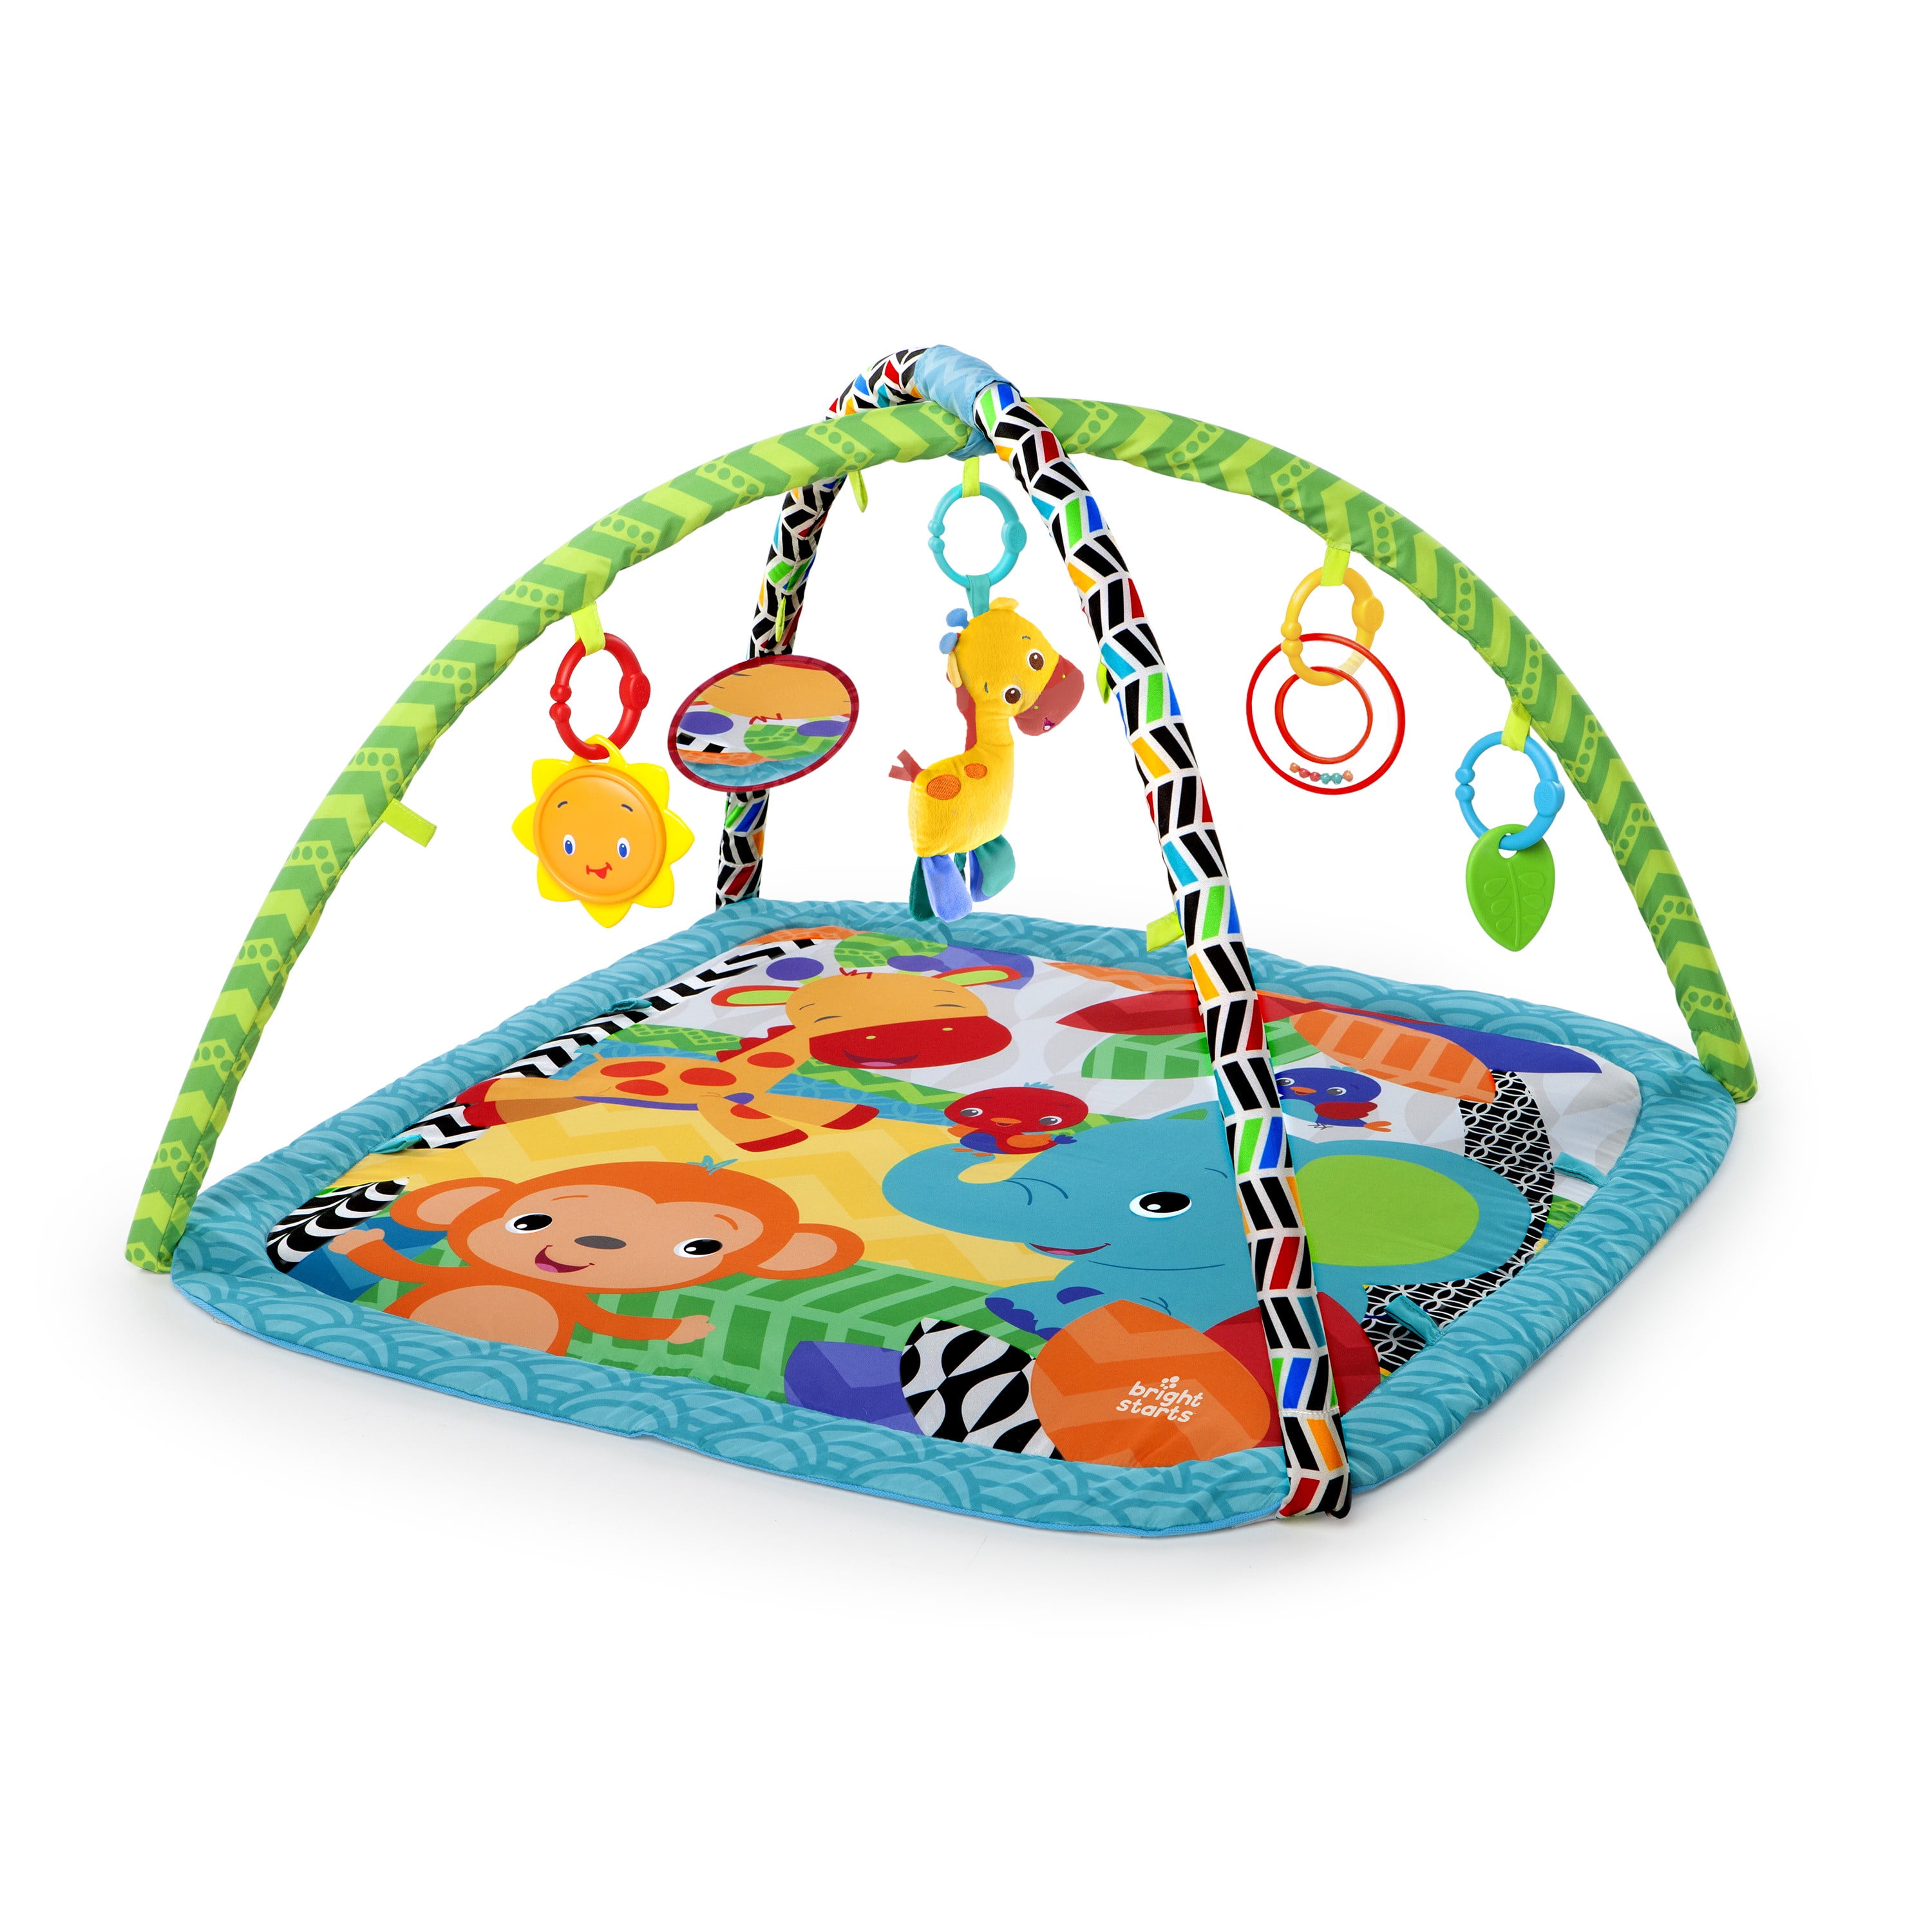 Bright Starts Zippy Zoo Activity Gym and Play Mat with Take-Along Toys,  Ages Newborn +